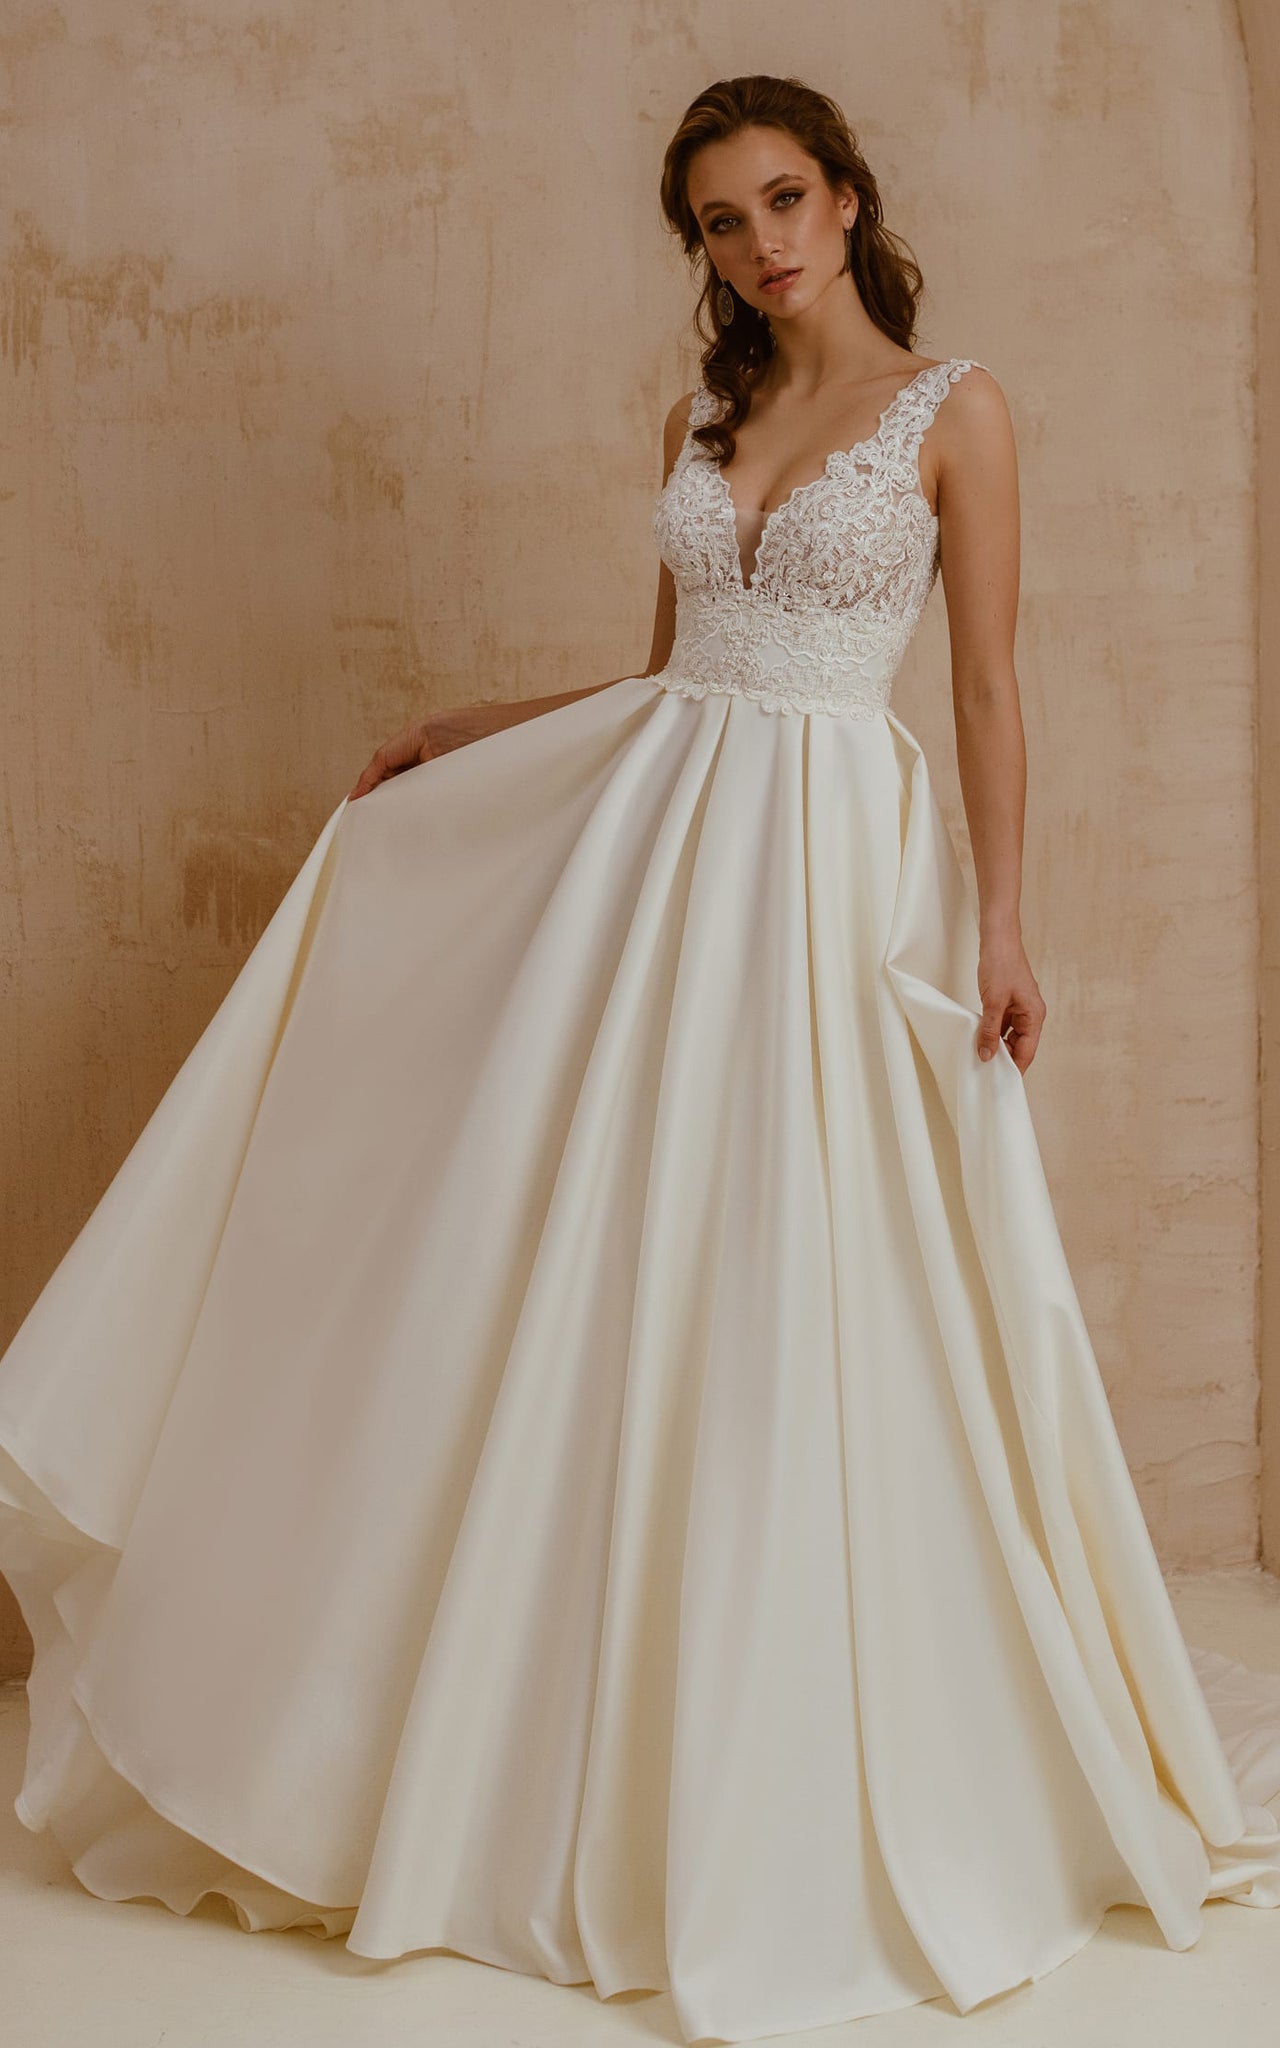 V-neck Short Sleeve Satin Lace A Line Floor-length Wedding Dress with Pleats and Sweep Train